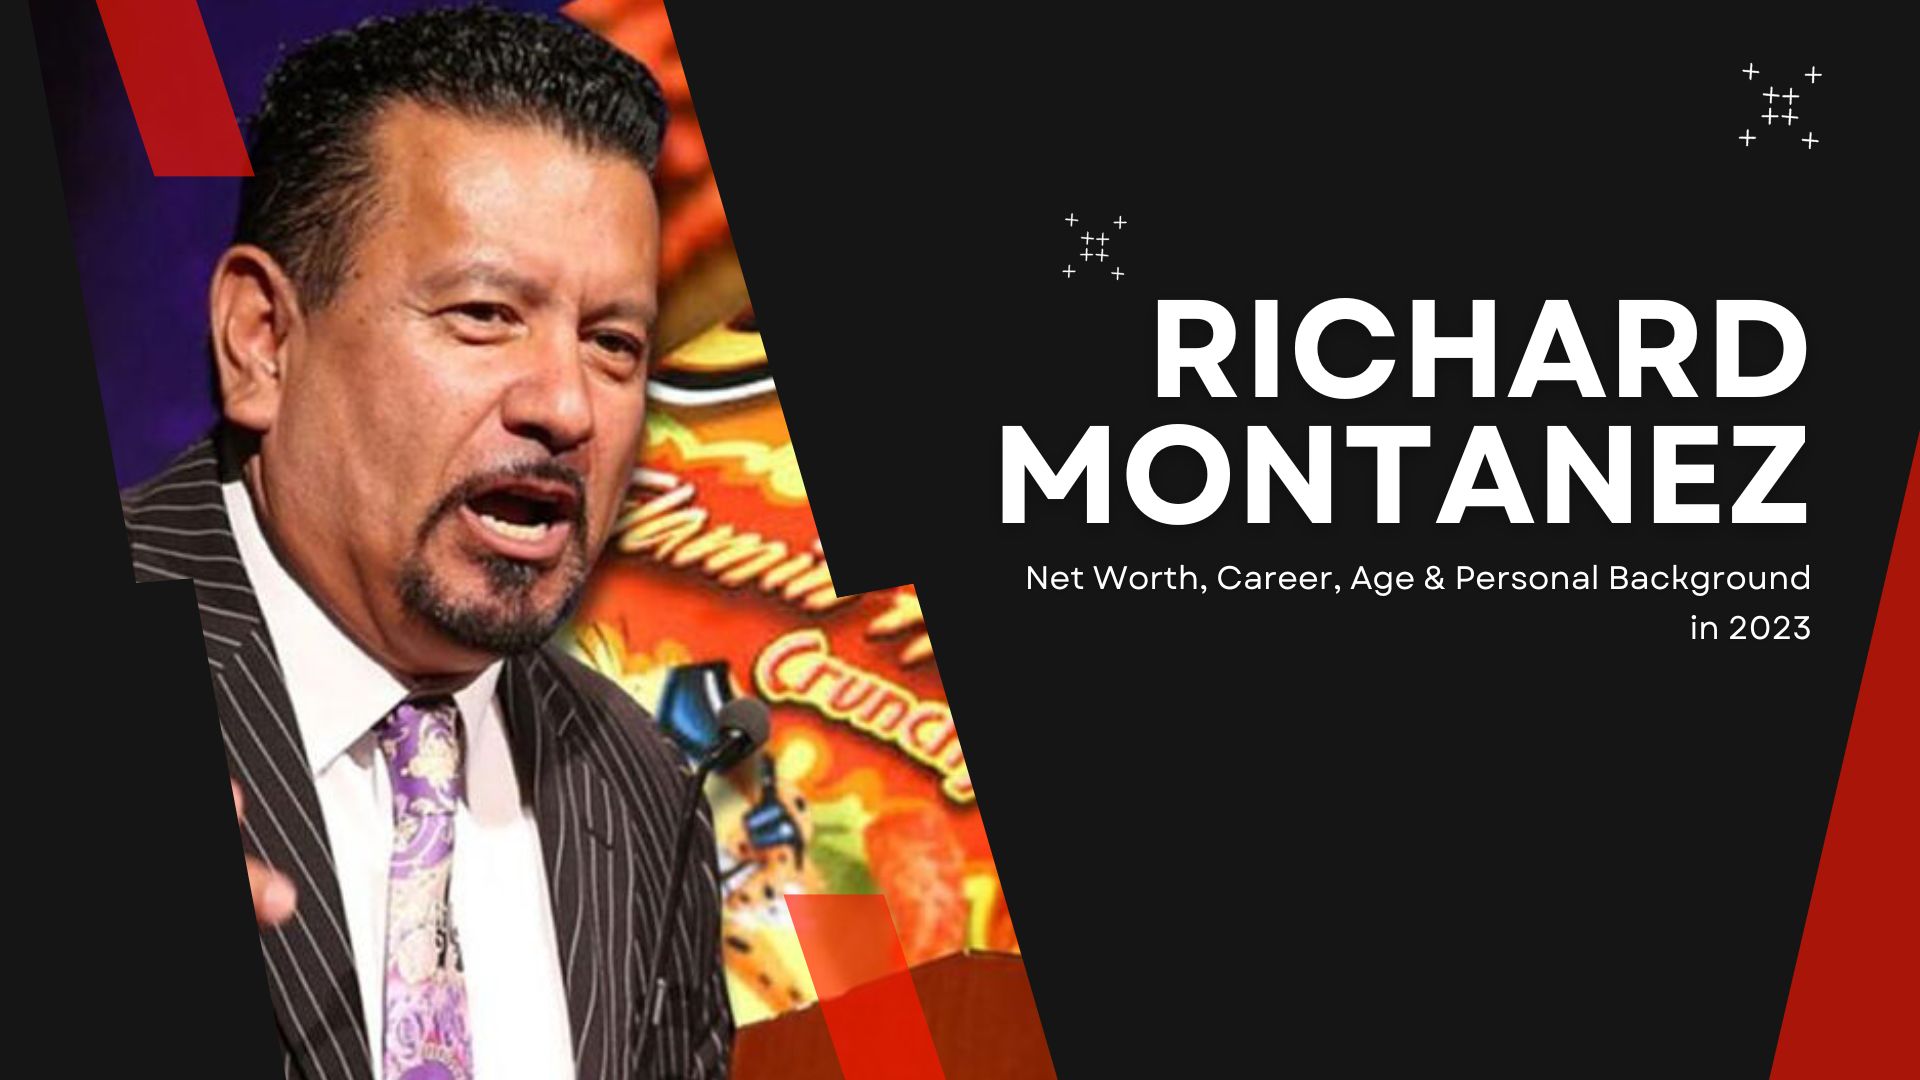 Richard Montanez Net Worth, Career, Age & Personal Background in 2023